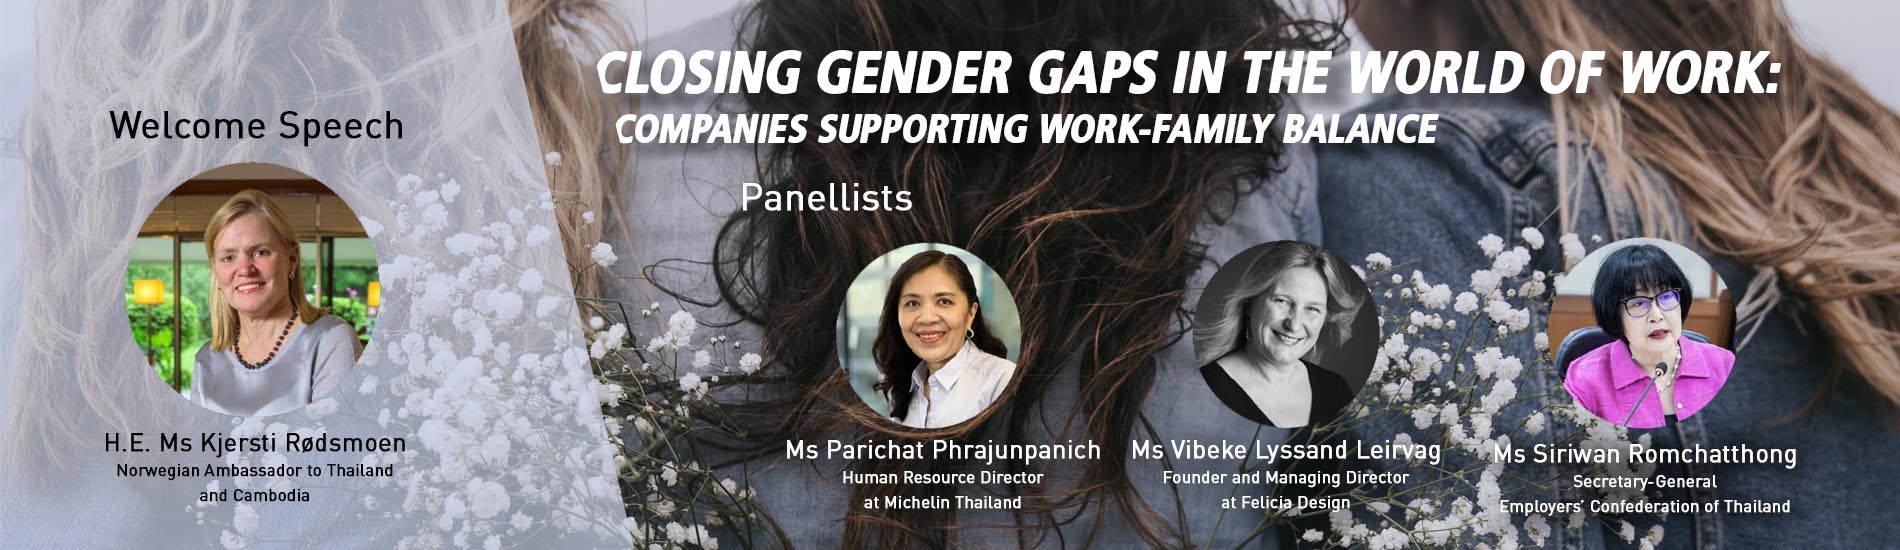 Closing Gender Gaps in the World of Work